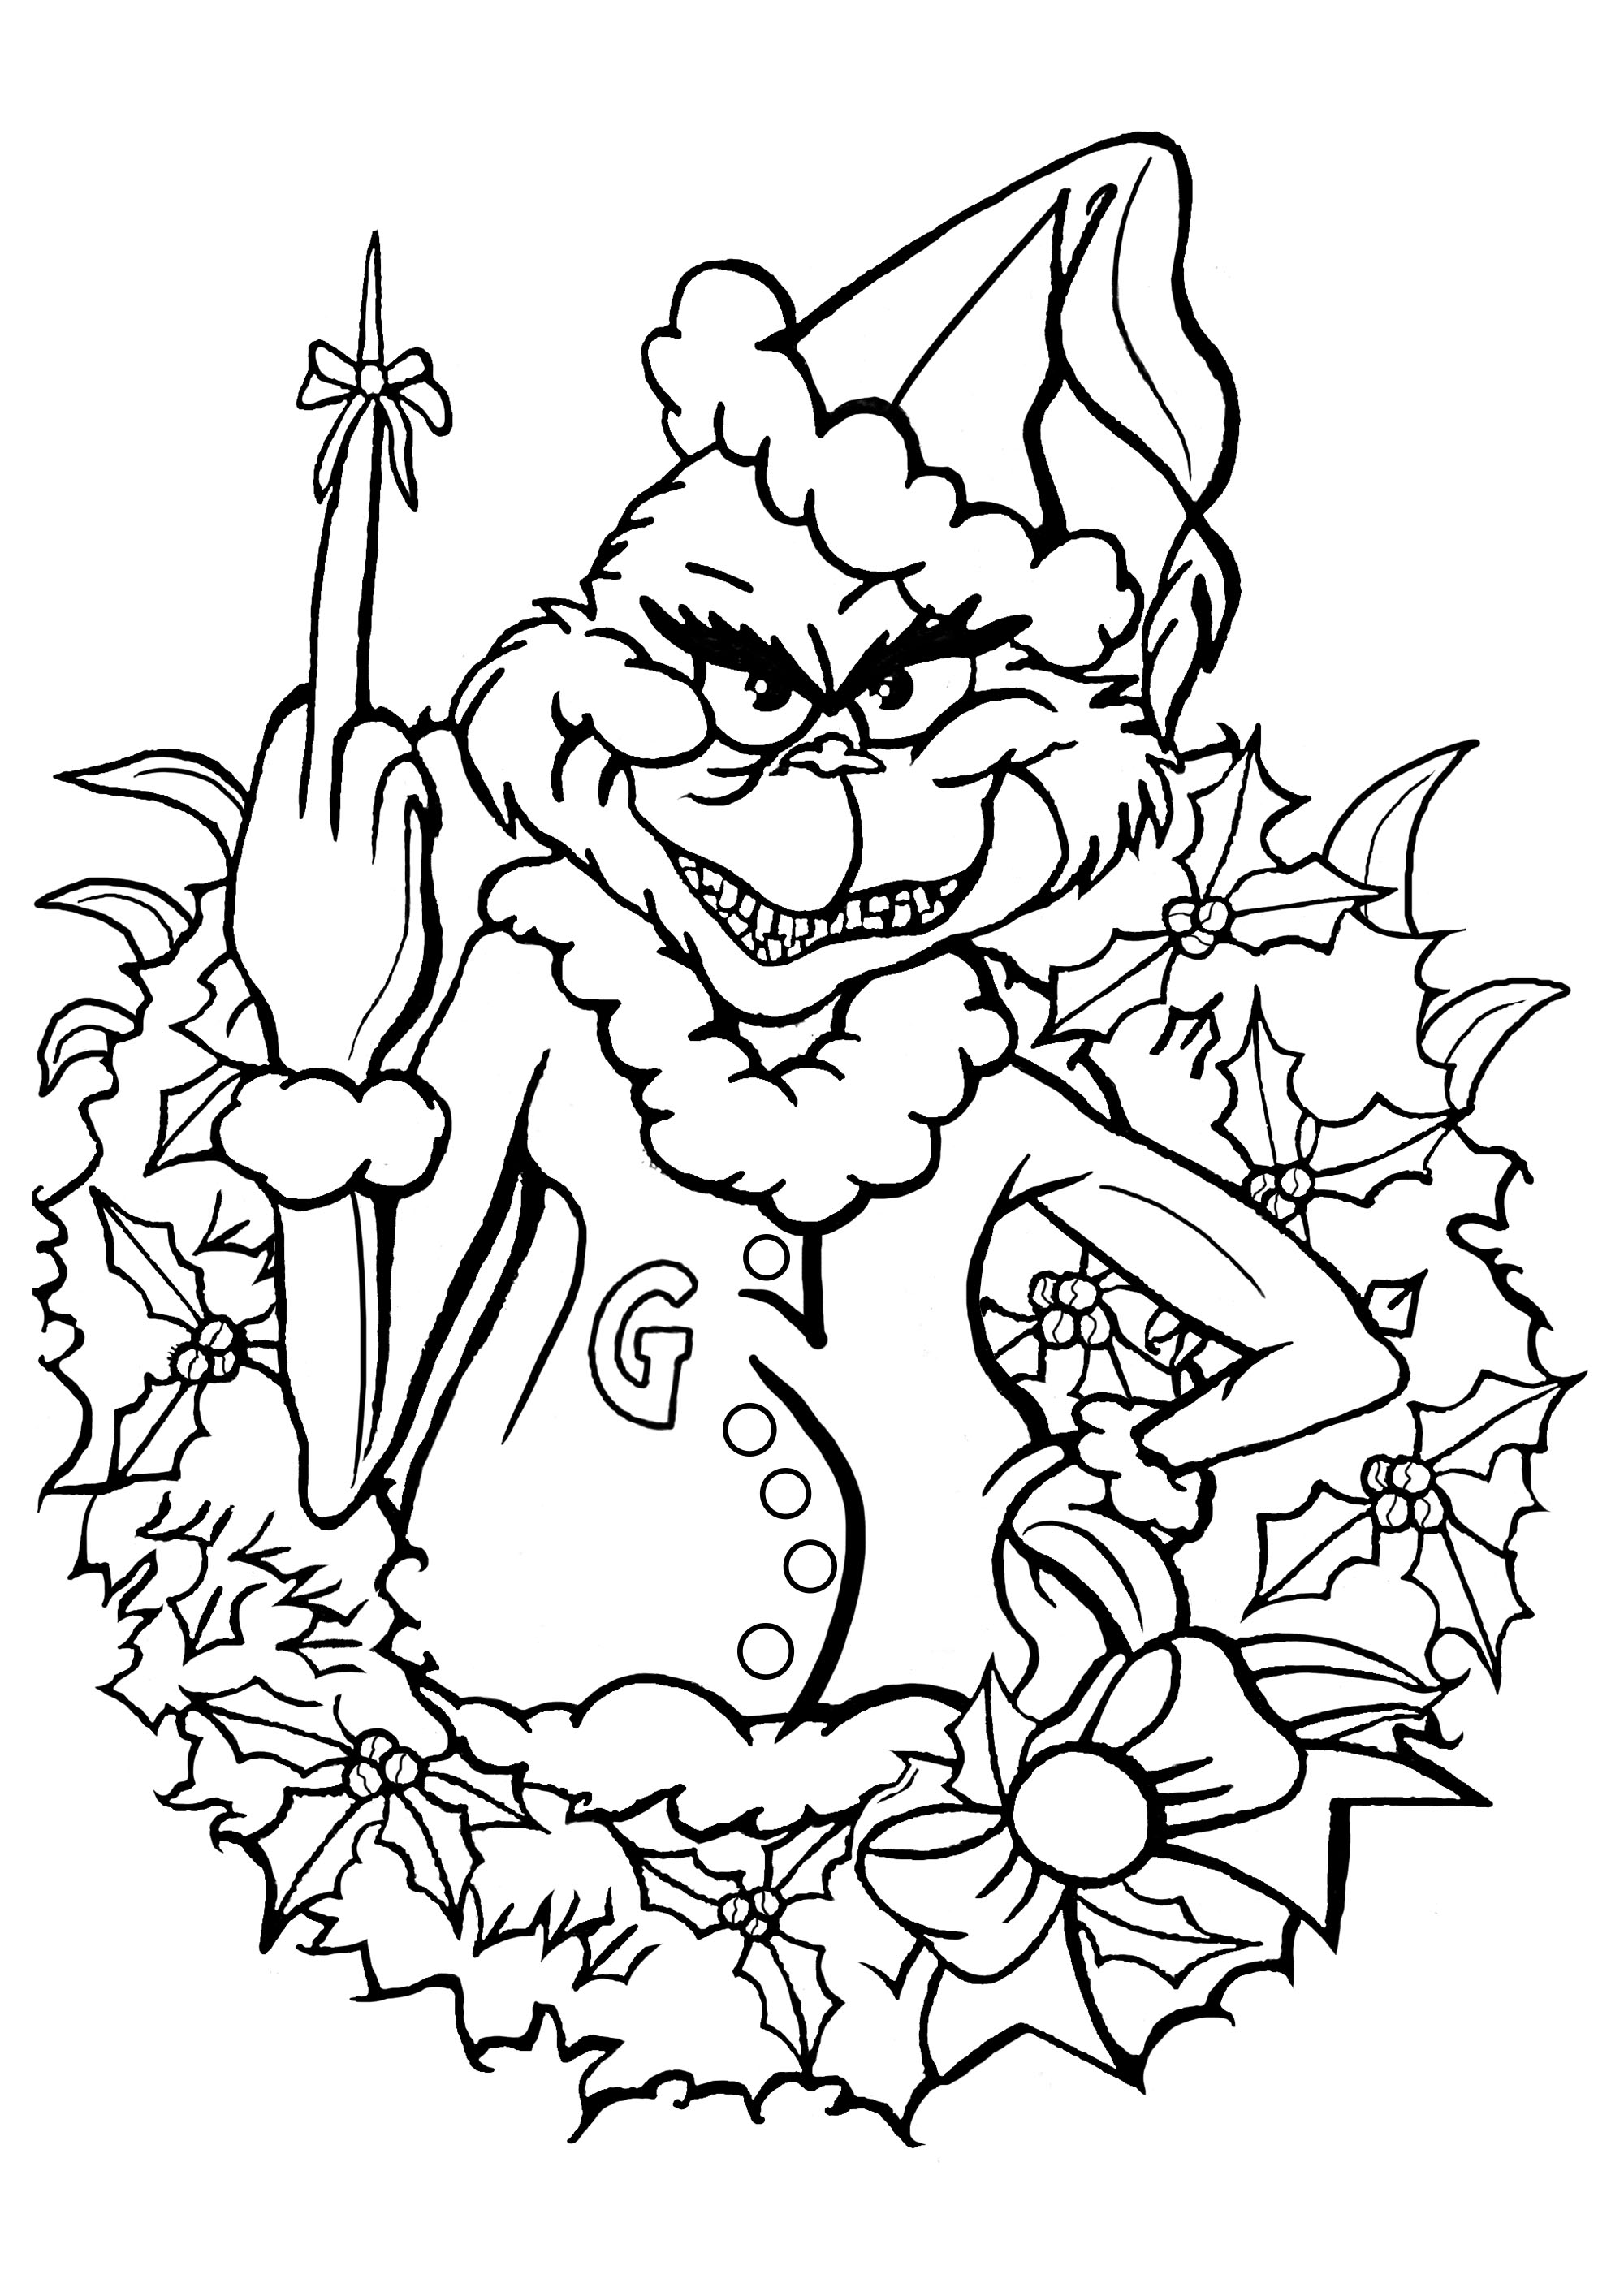 scary-grinch-with-wreath-coloring-page-free-printable-coloring-pages-for-kids